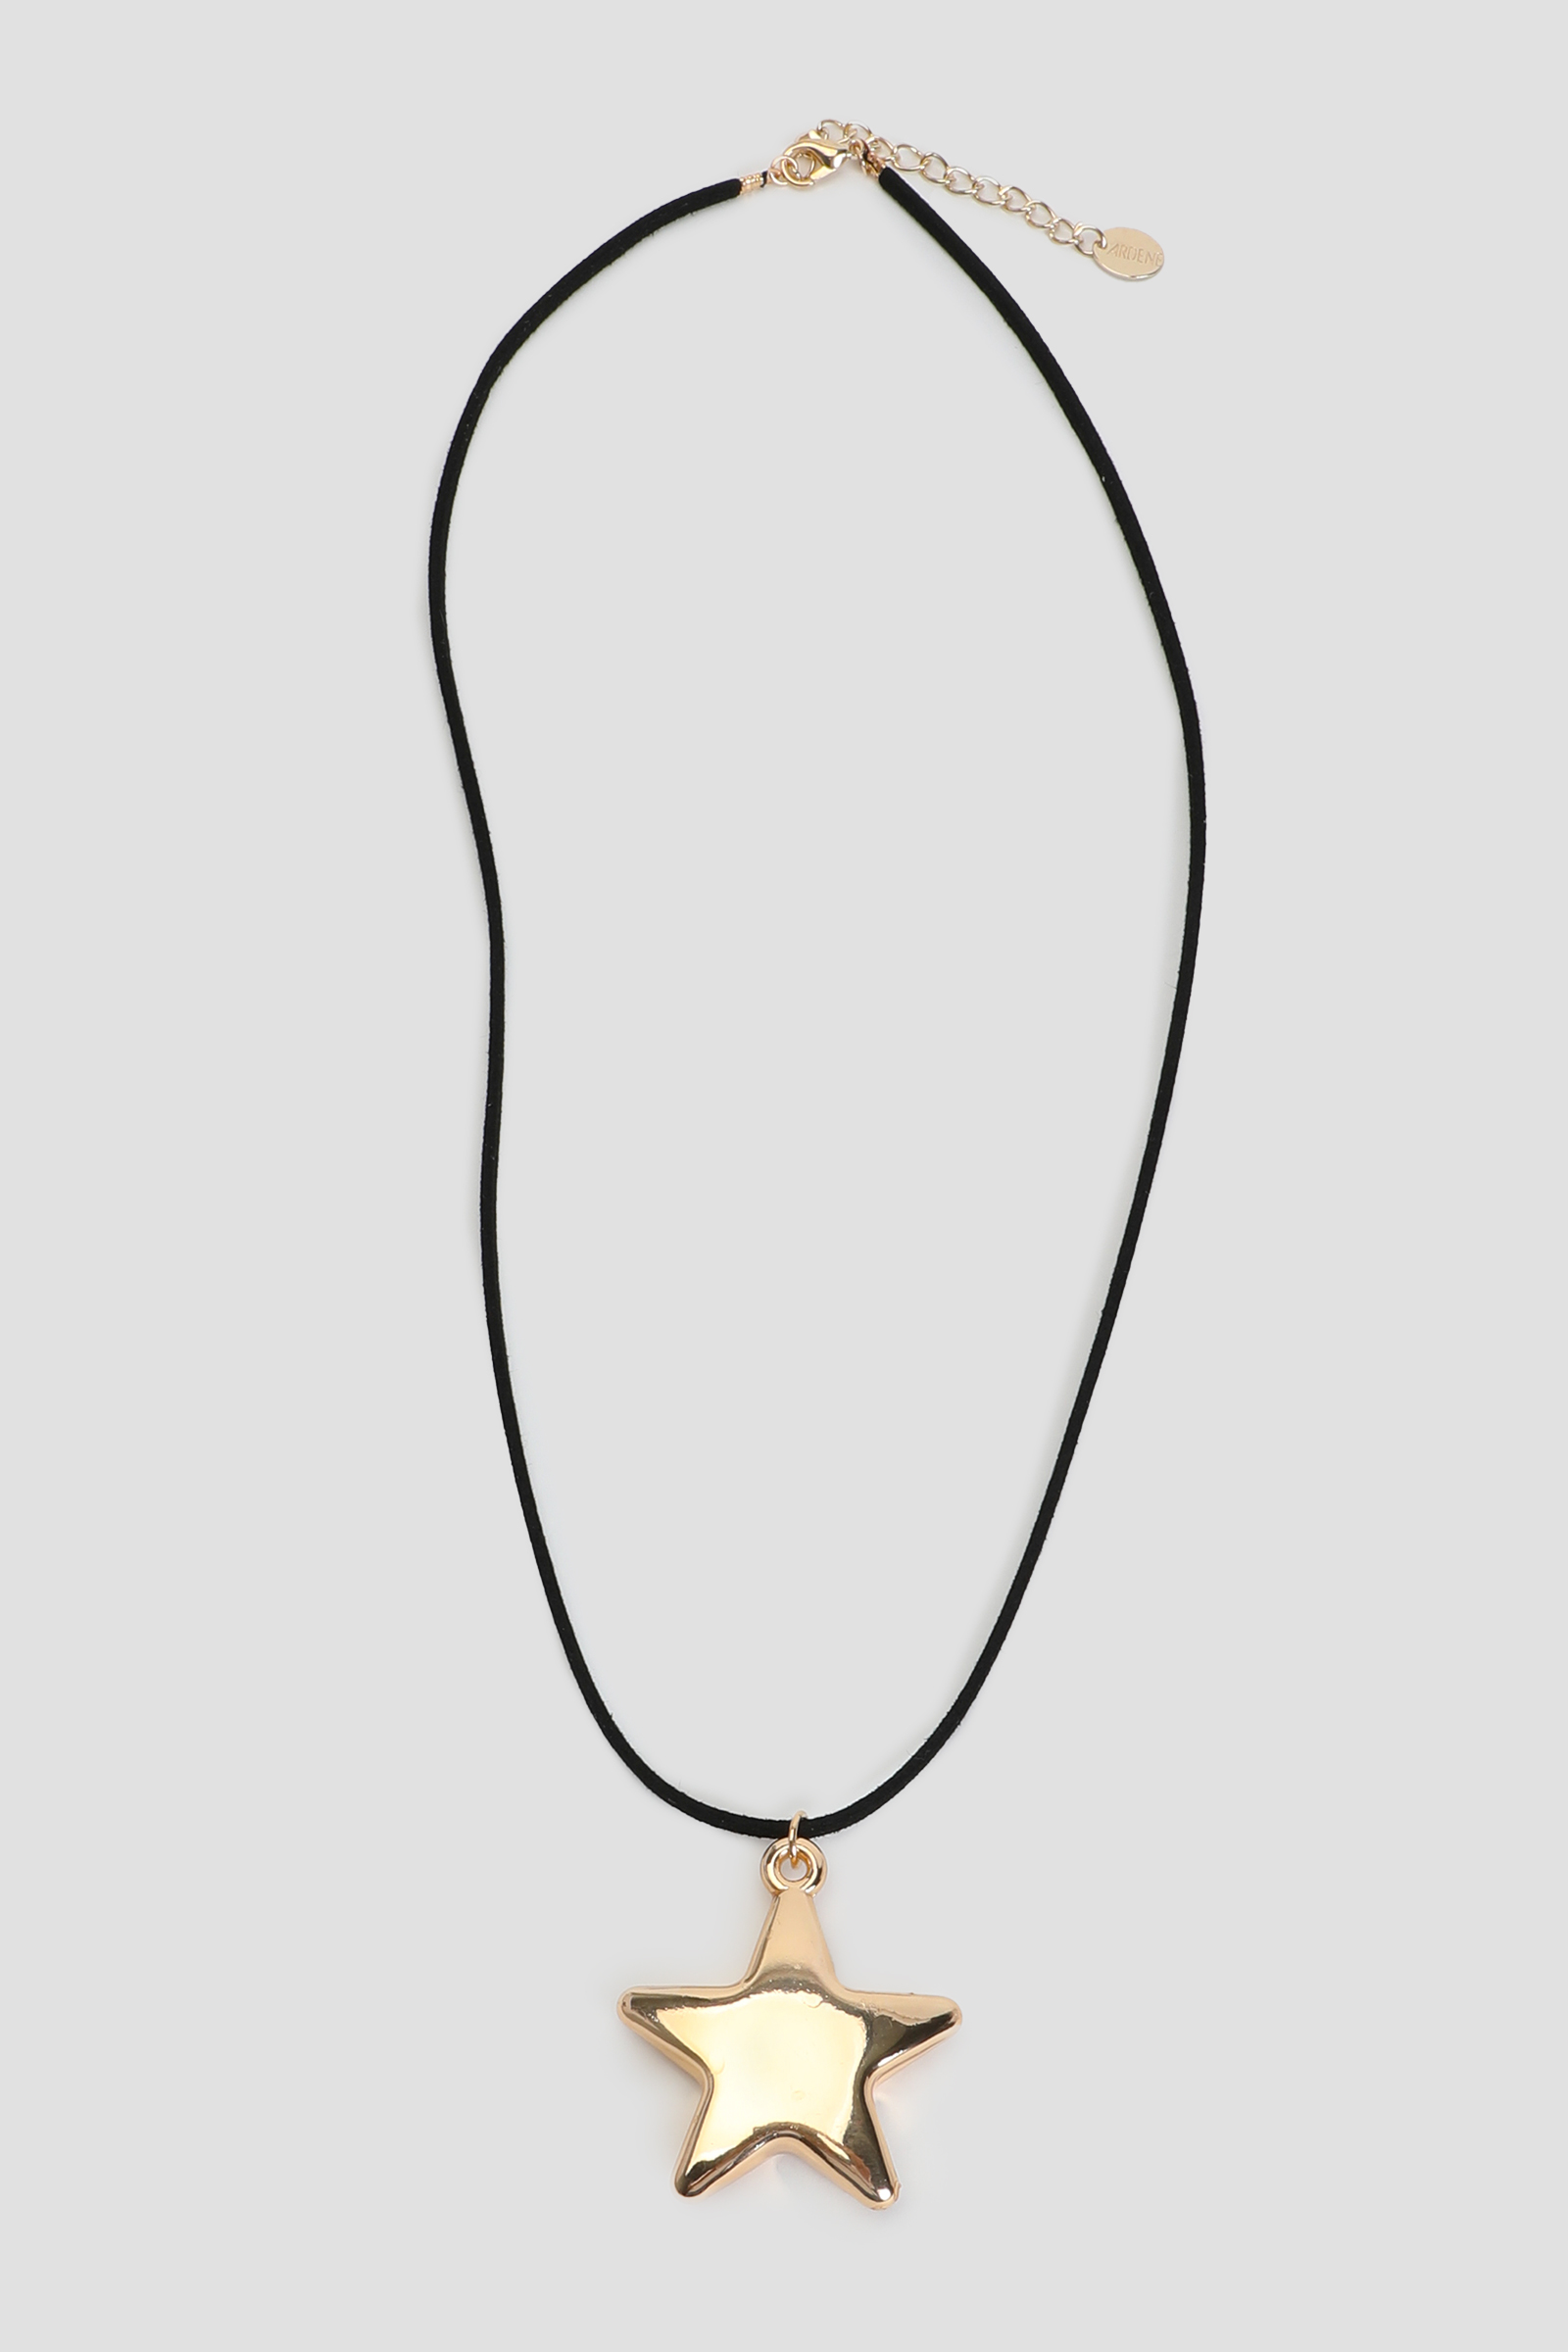 Ardene Cord Necklace with Star Pendant in Gold